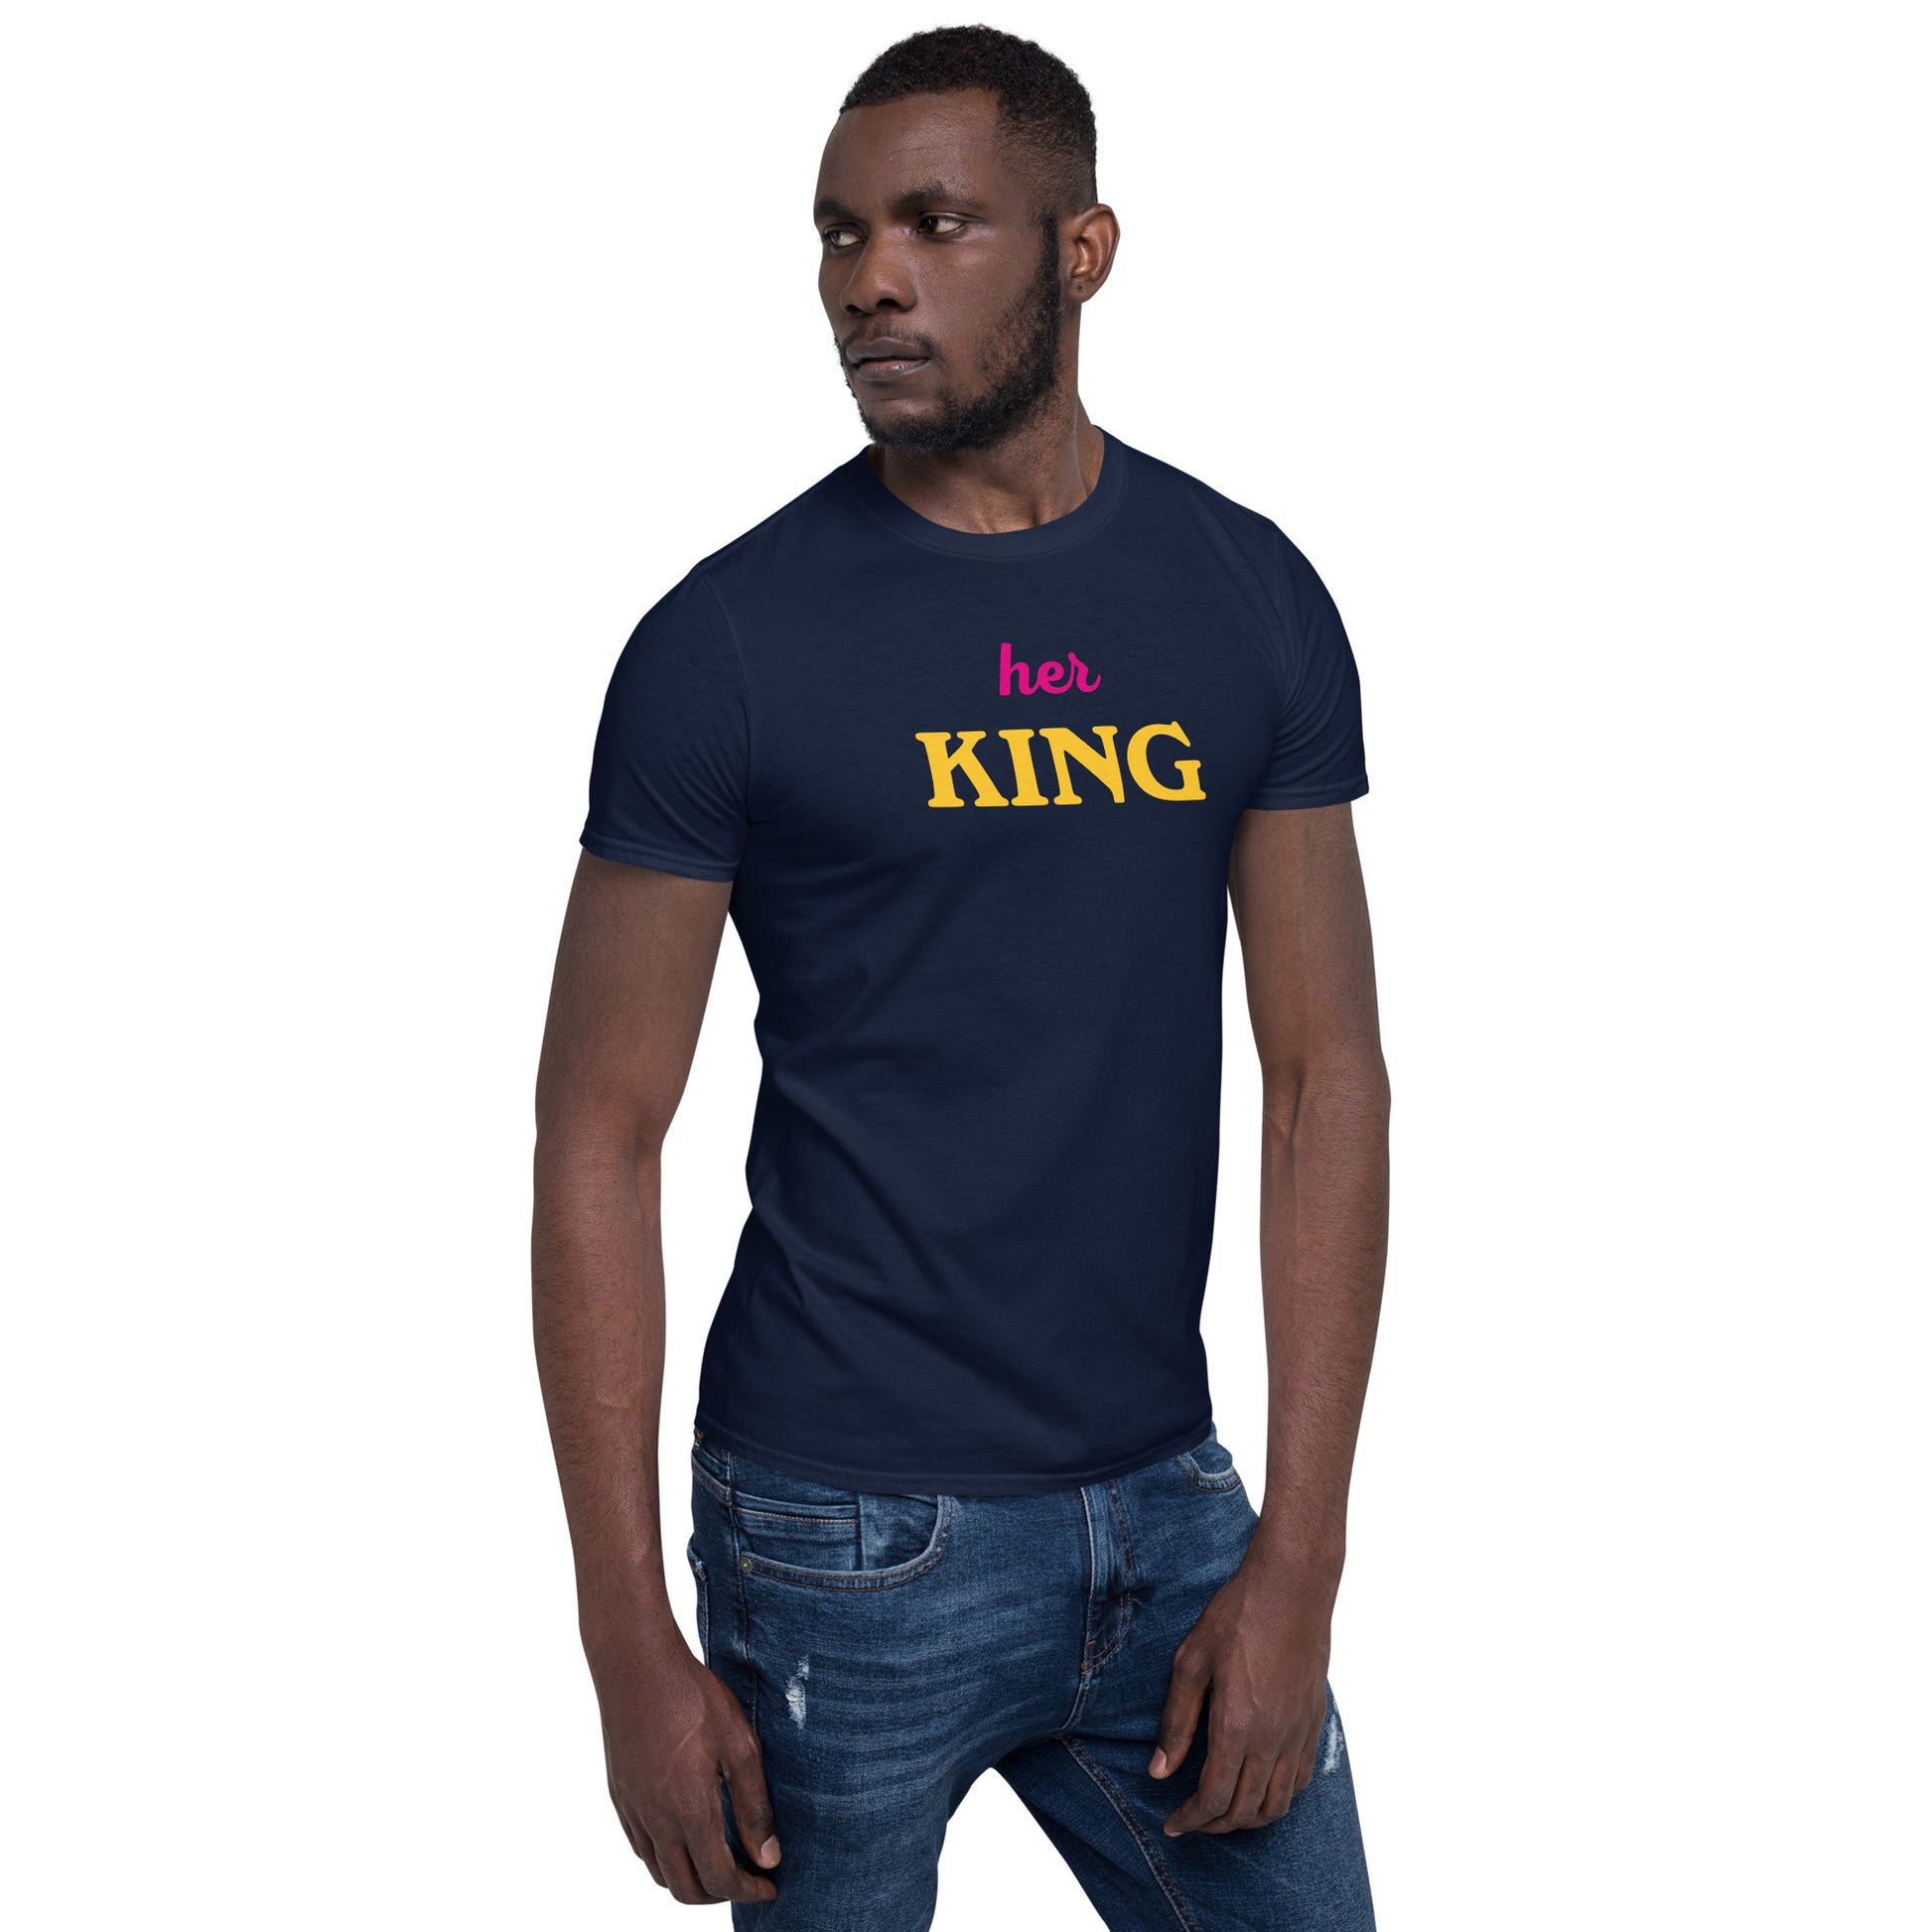 Her King Softstyle T-Shirt navy left